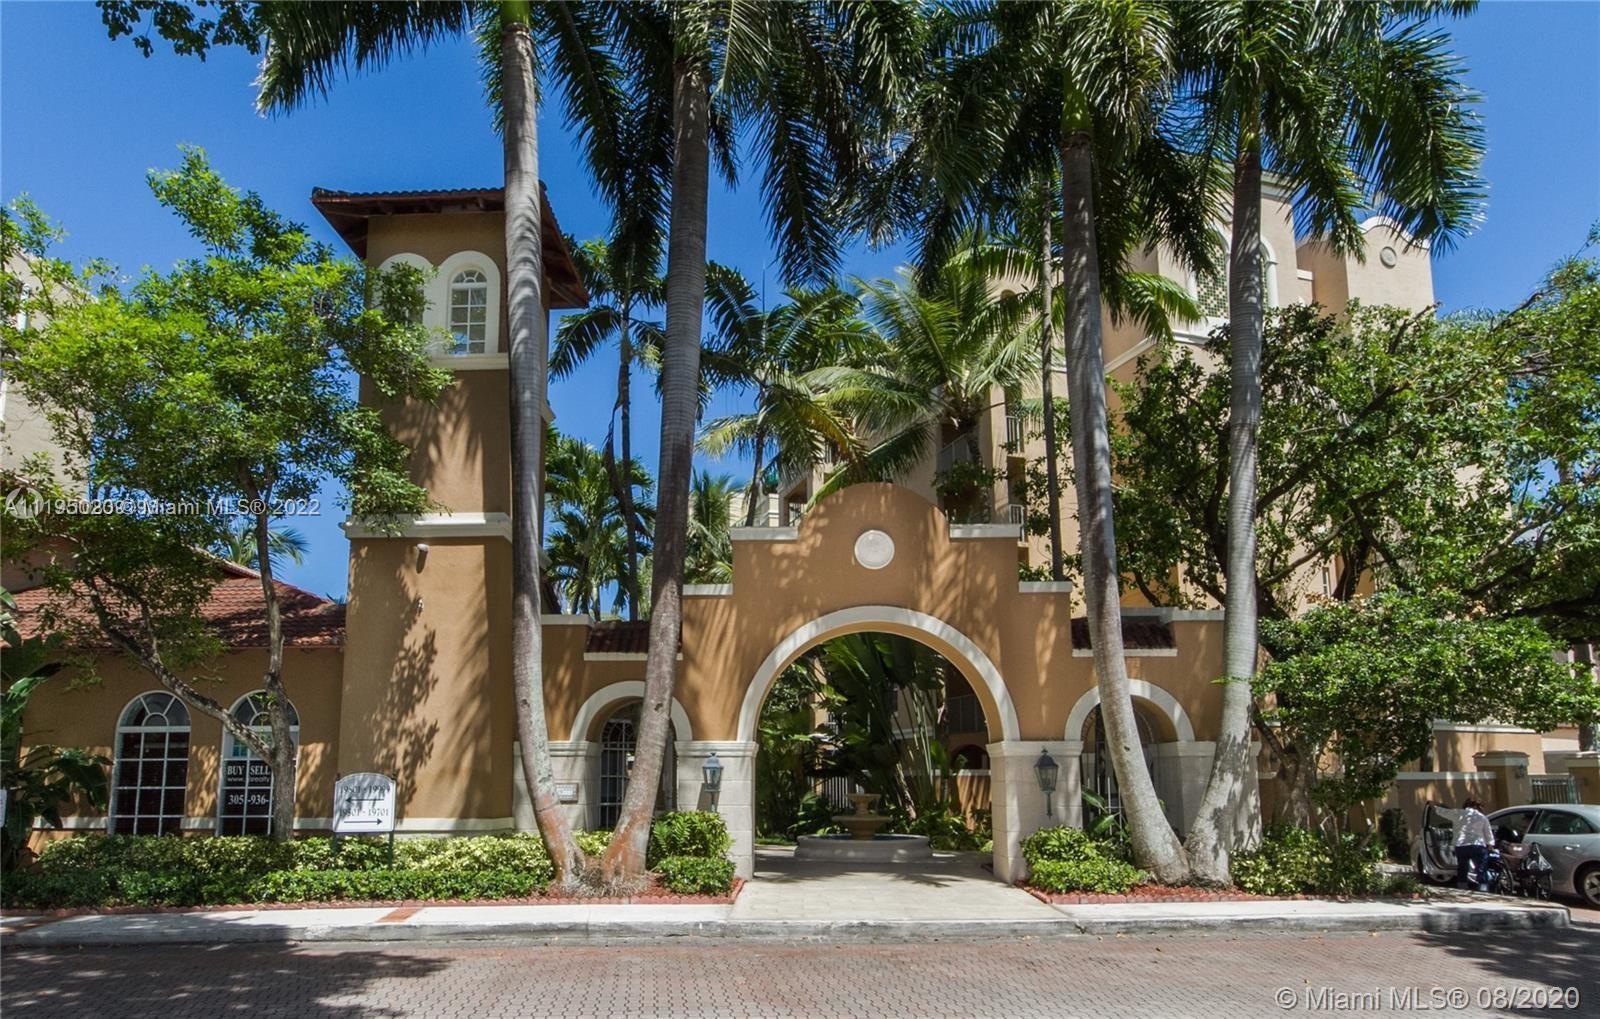 Condo in gated community at Yacht Club in Aventura; small walking distance to golf course. First cla